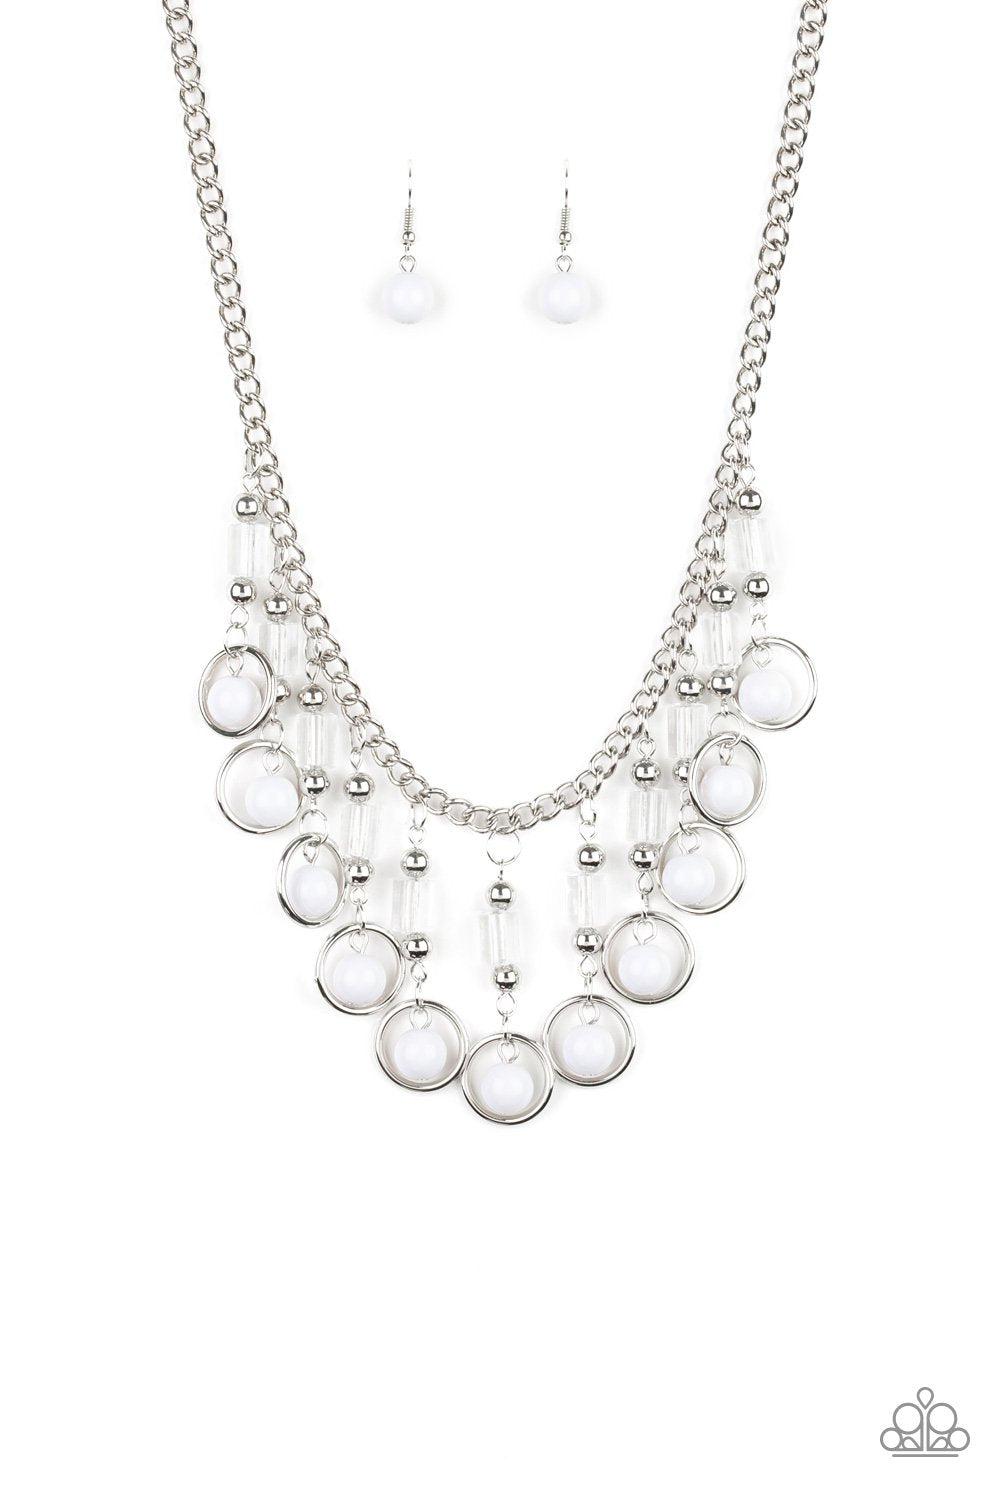 Cool Cascade White Necklace - Paparazzi Accessories - lightbox -CarasShop.com - $5 Jewelry by Cara Jewels